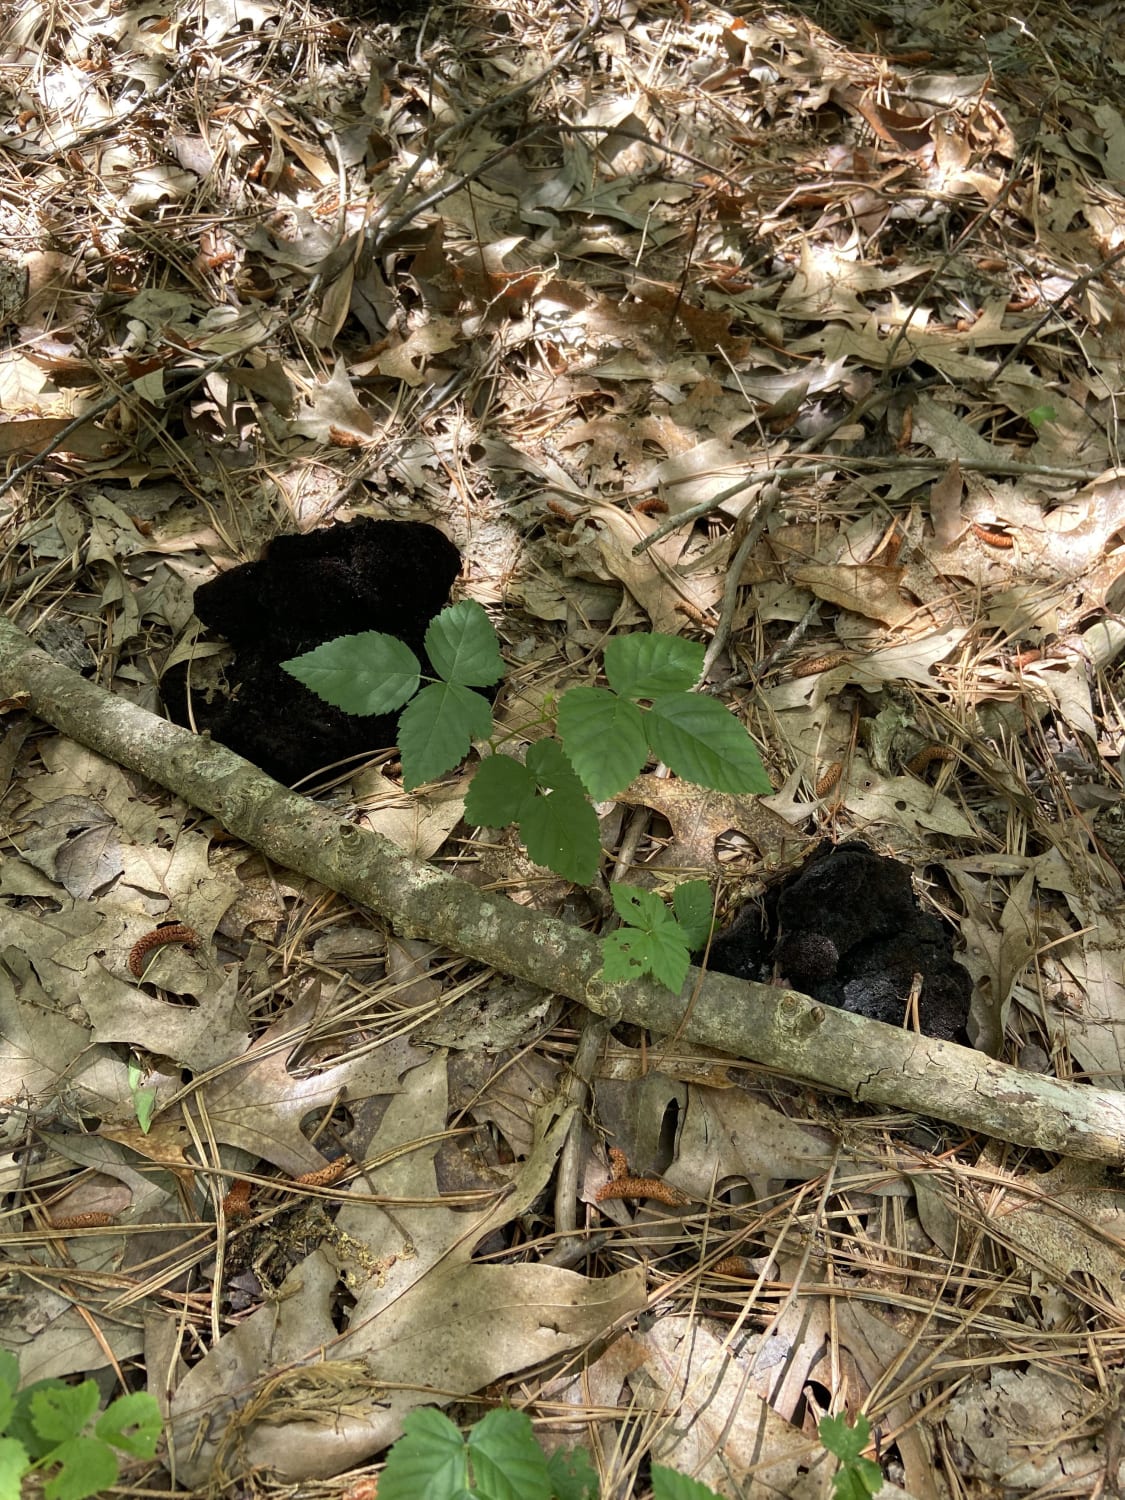 Found these little guys on my nature walk (central NJ) the other day. Any idea what the species is?